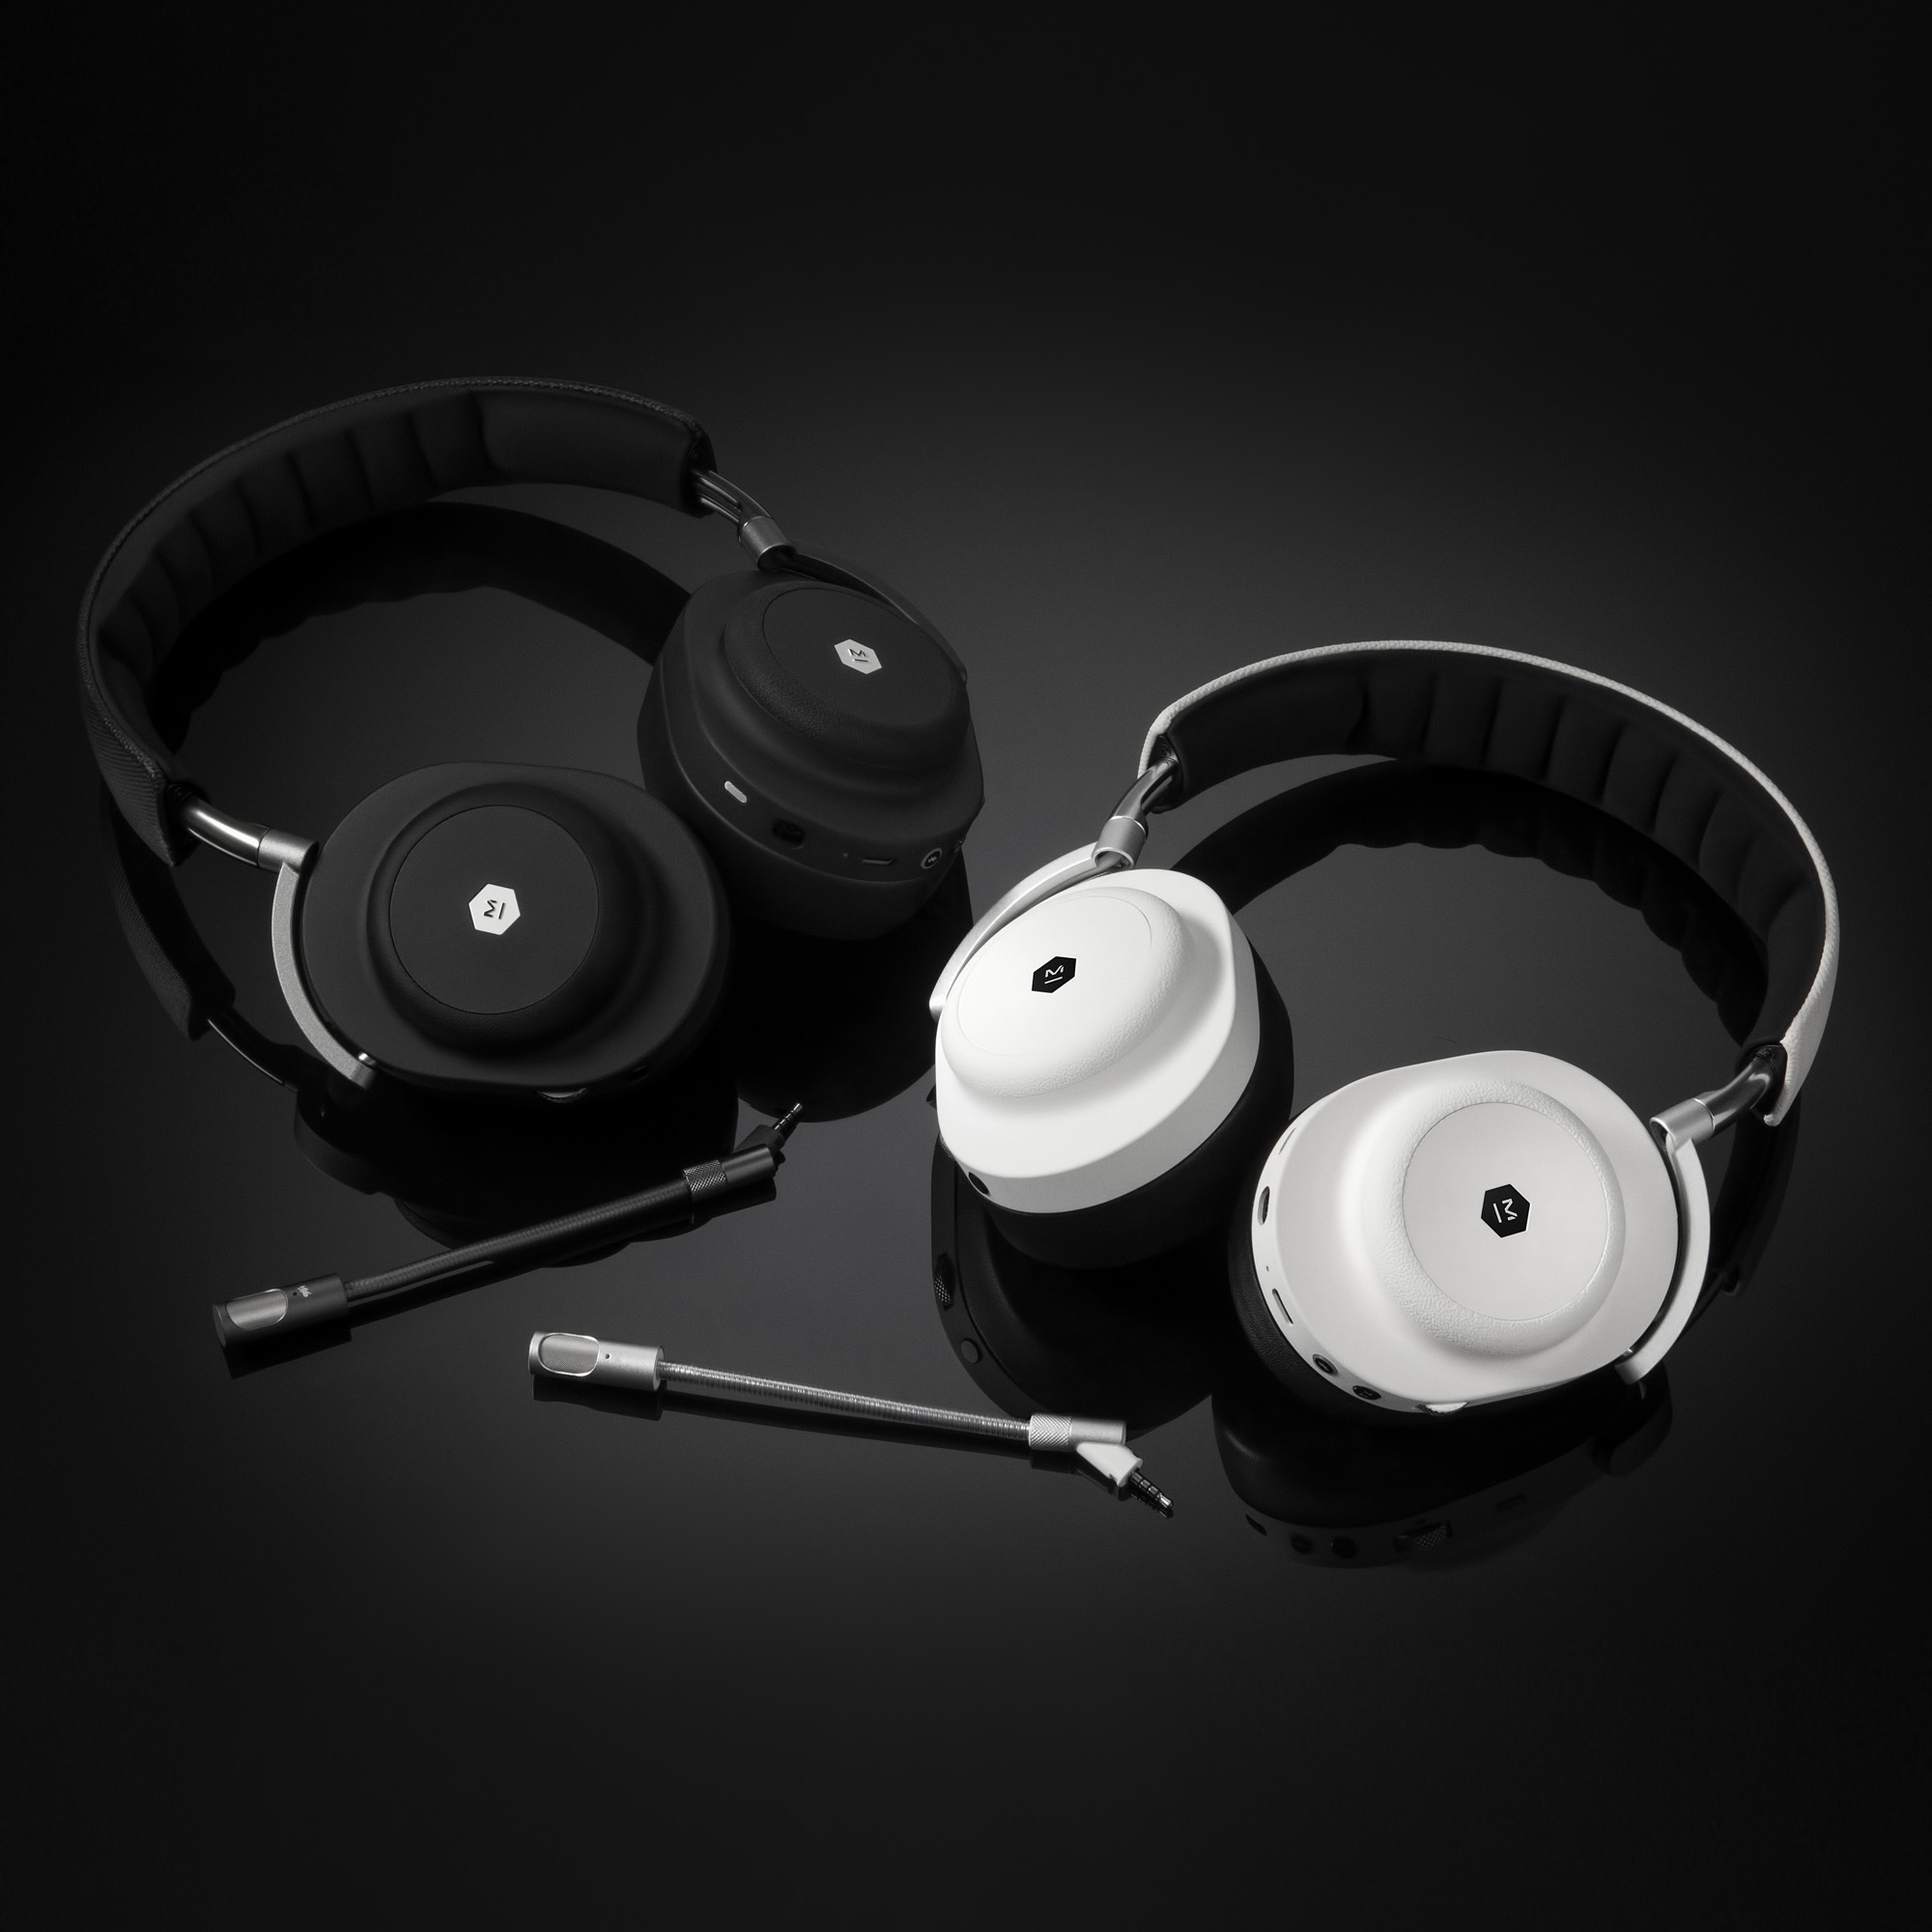 The MG20 Wireless Gaming Headphones are the perfect gift for gamers and listeners alike.